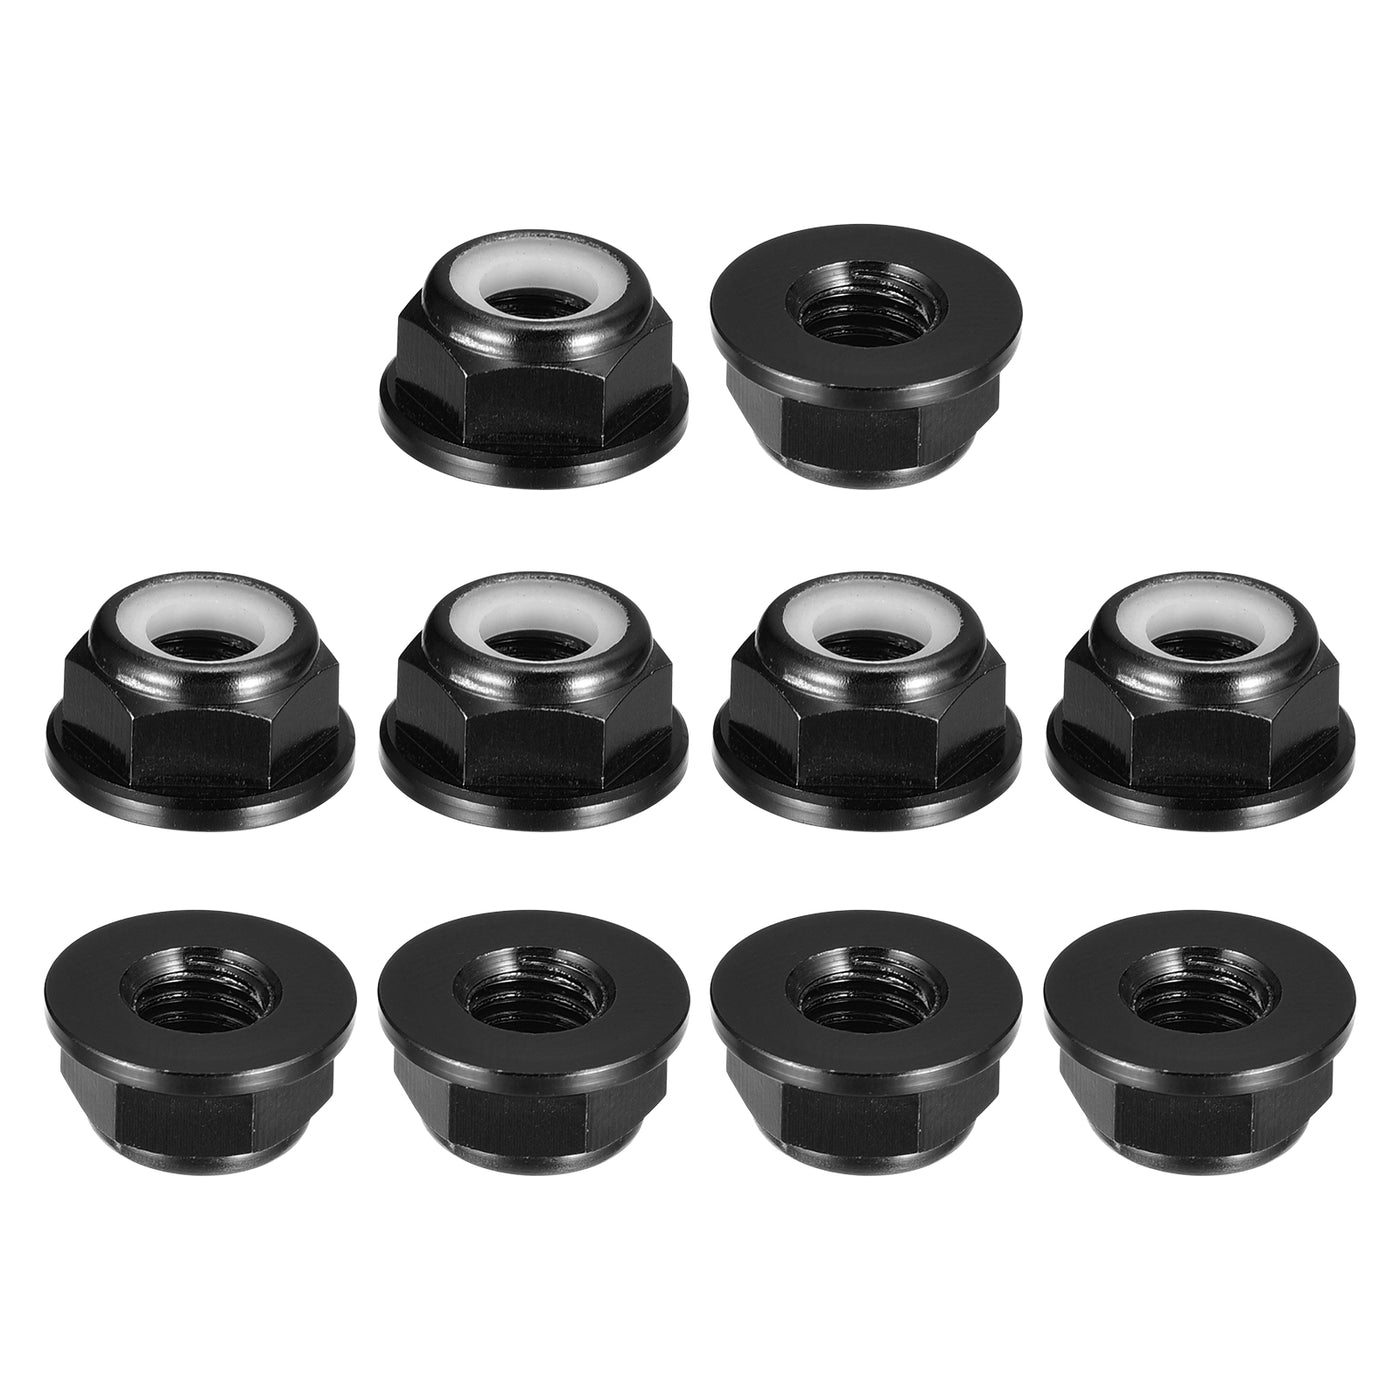 uxcell Uxcell Nylon Insert Hex Lock Nuts, 10pcs - M6 x 1mm Aluminum Alloy Self-Locking Nut, Anodizing Flange Lock Nut for Fasteners (Black)